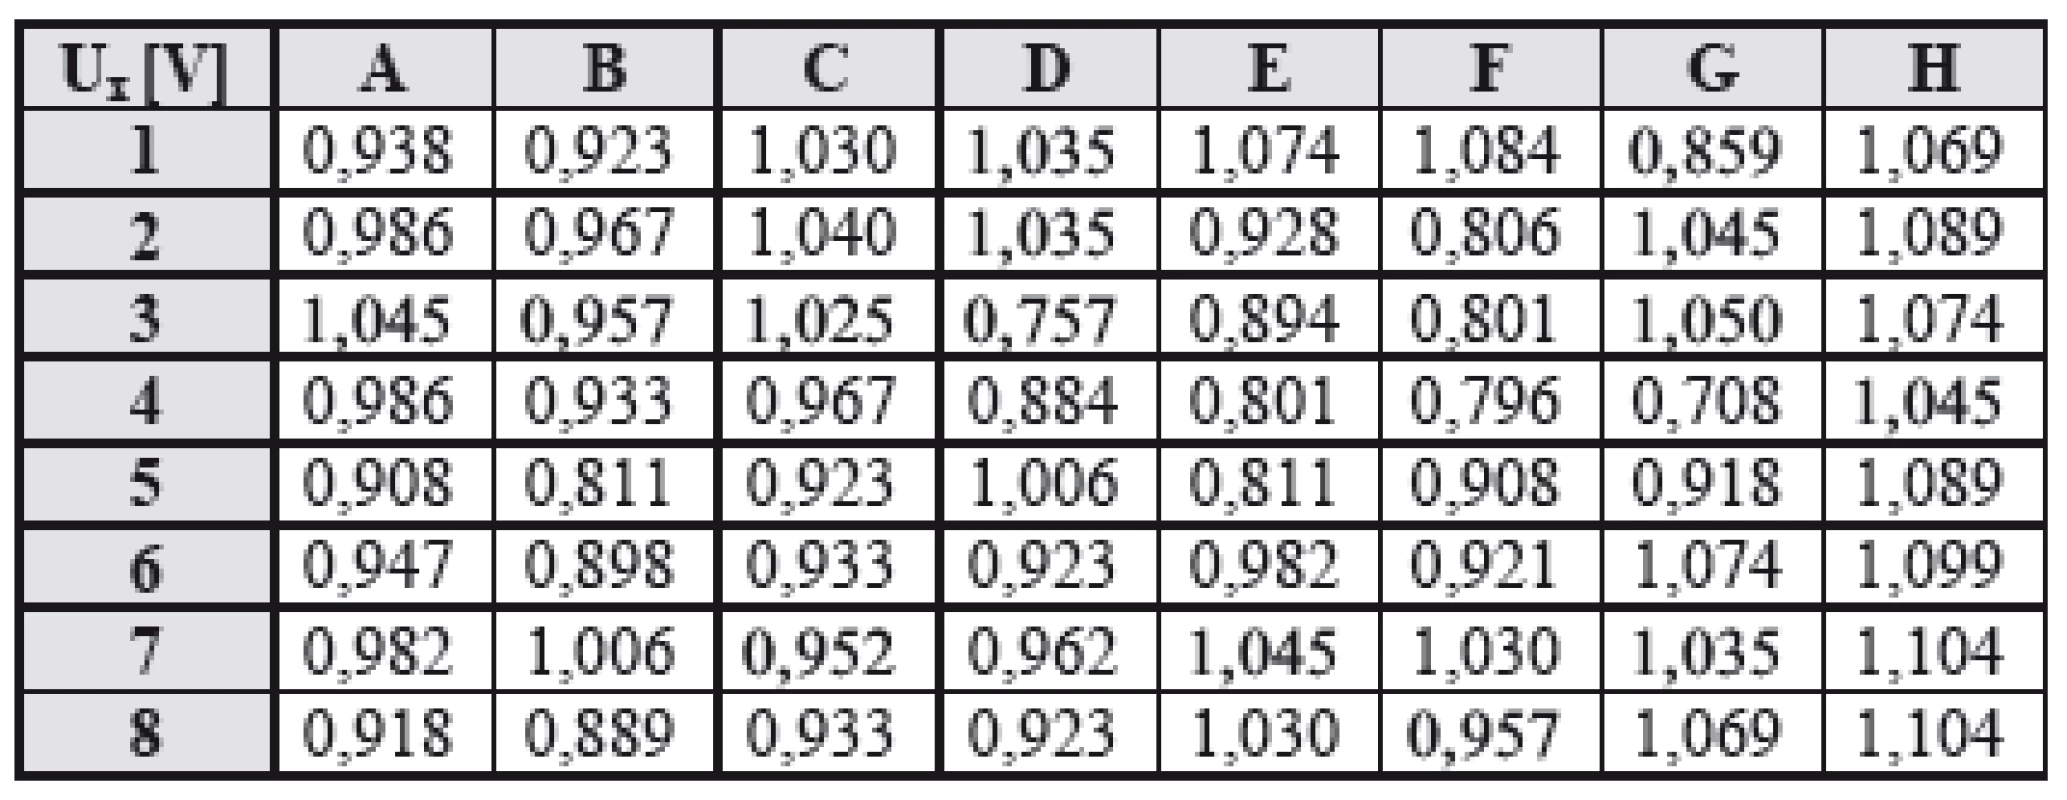 Table of measured voltages Ux on electrodes, at the end of measurement, time t=30 minutes (8x8 electrodes in matrix, in rows and columns).